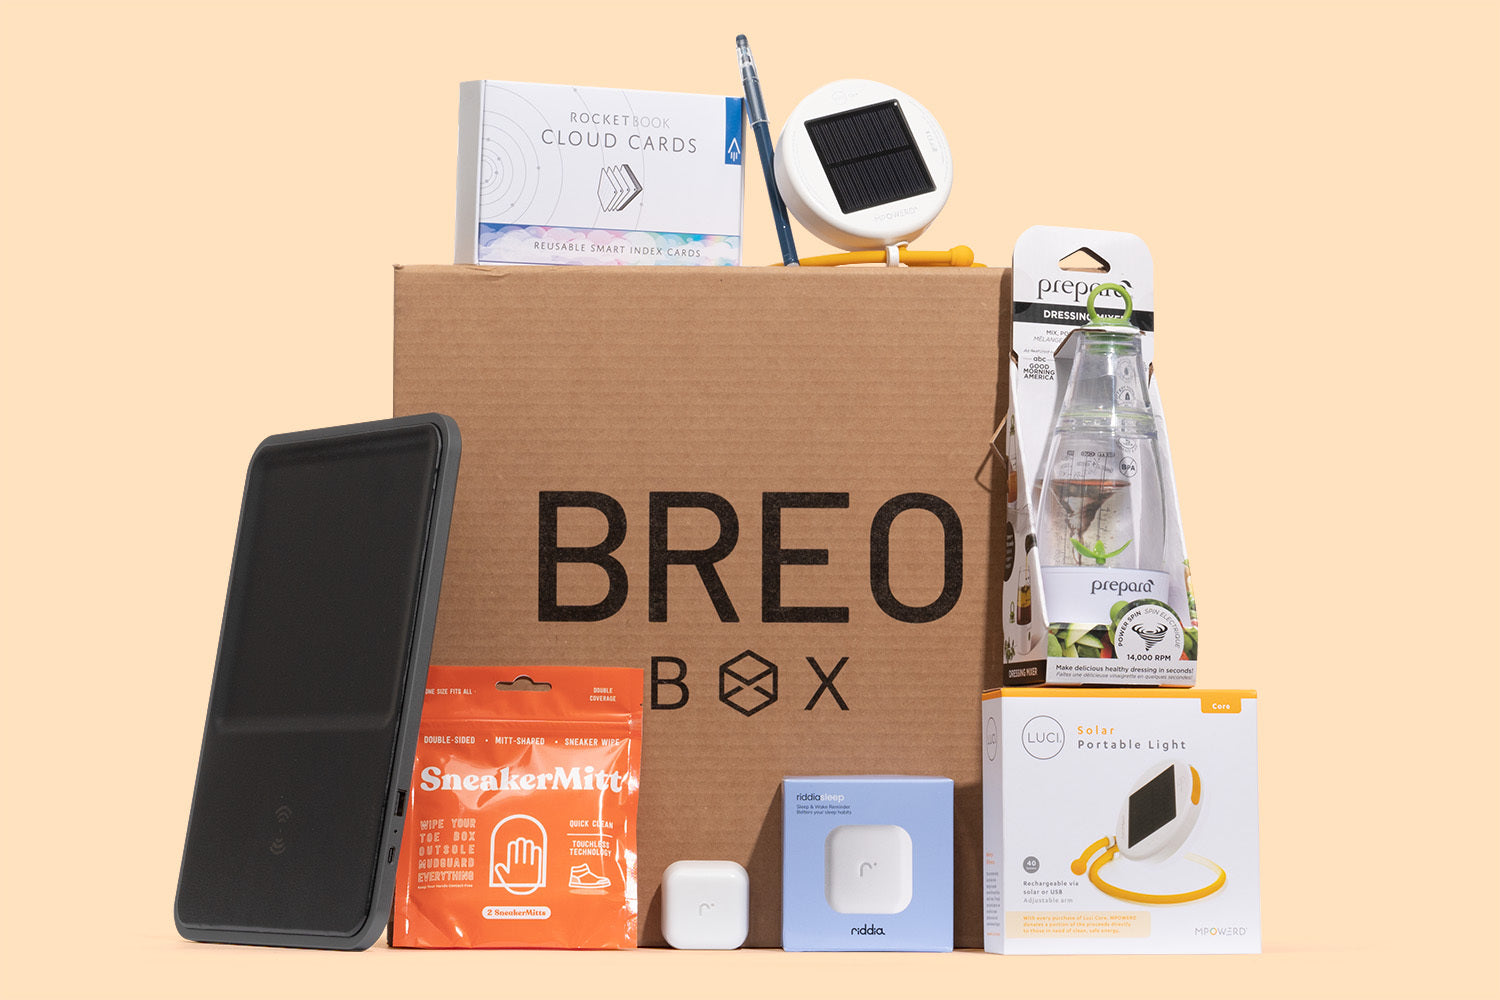 8 weird kitchen gadgets you never knew you needed – BREO BOX